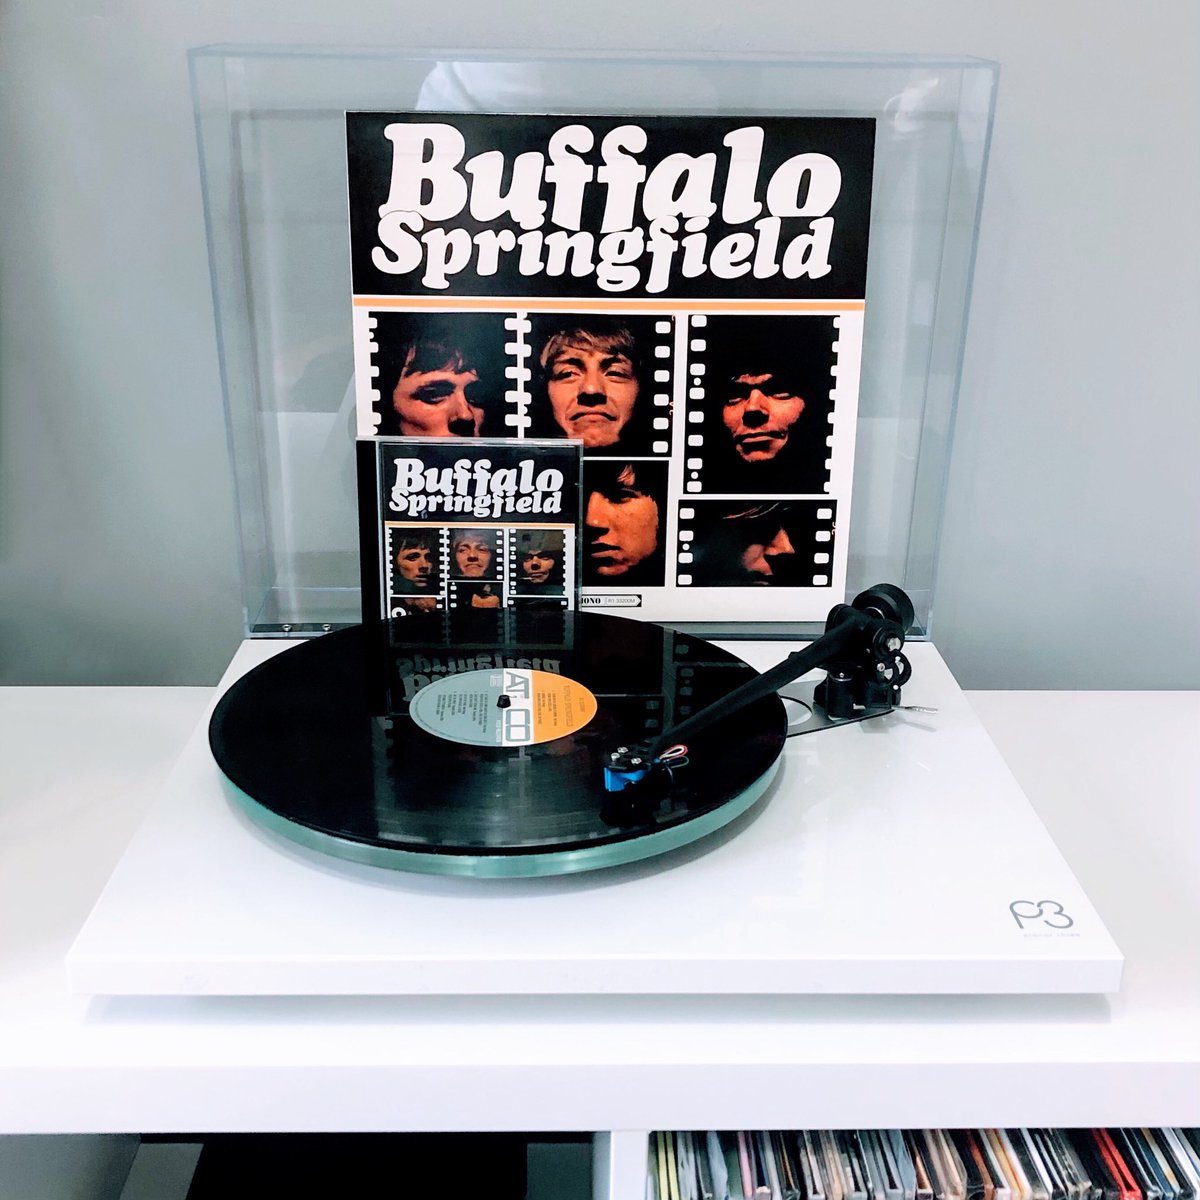 68.Buffalo SpringfieldBSThough their career was over shortly after it began and their relationships often fractious, they recorded so much great music in that little time. This album showcases what great pop songwriters NY & SS were #AtoZMusicChallenge #AtoZMusicCollection